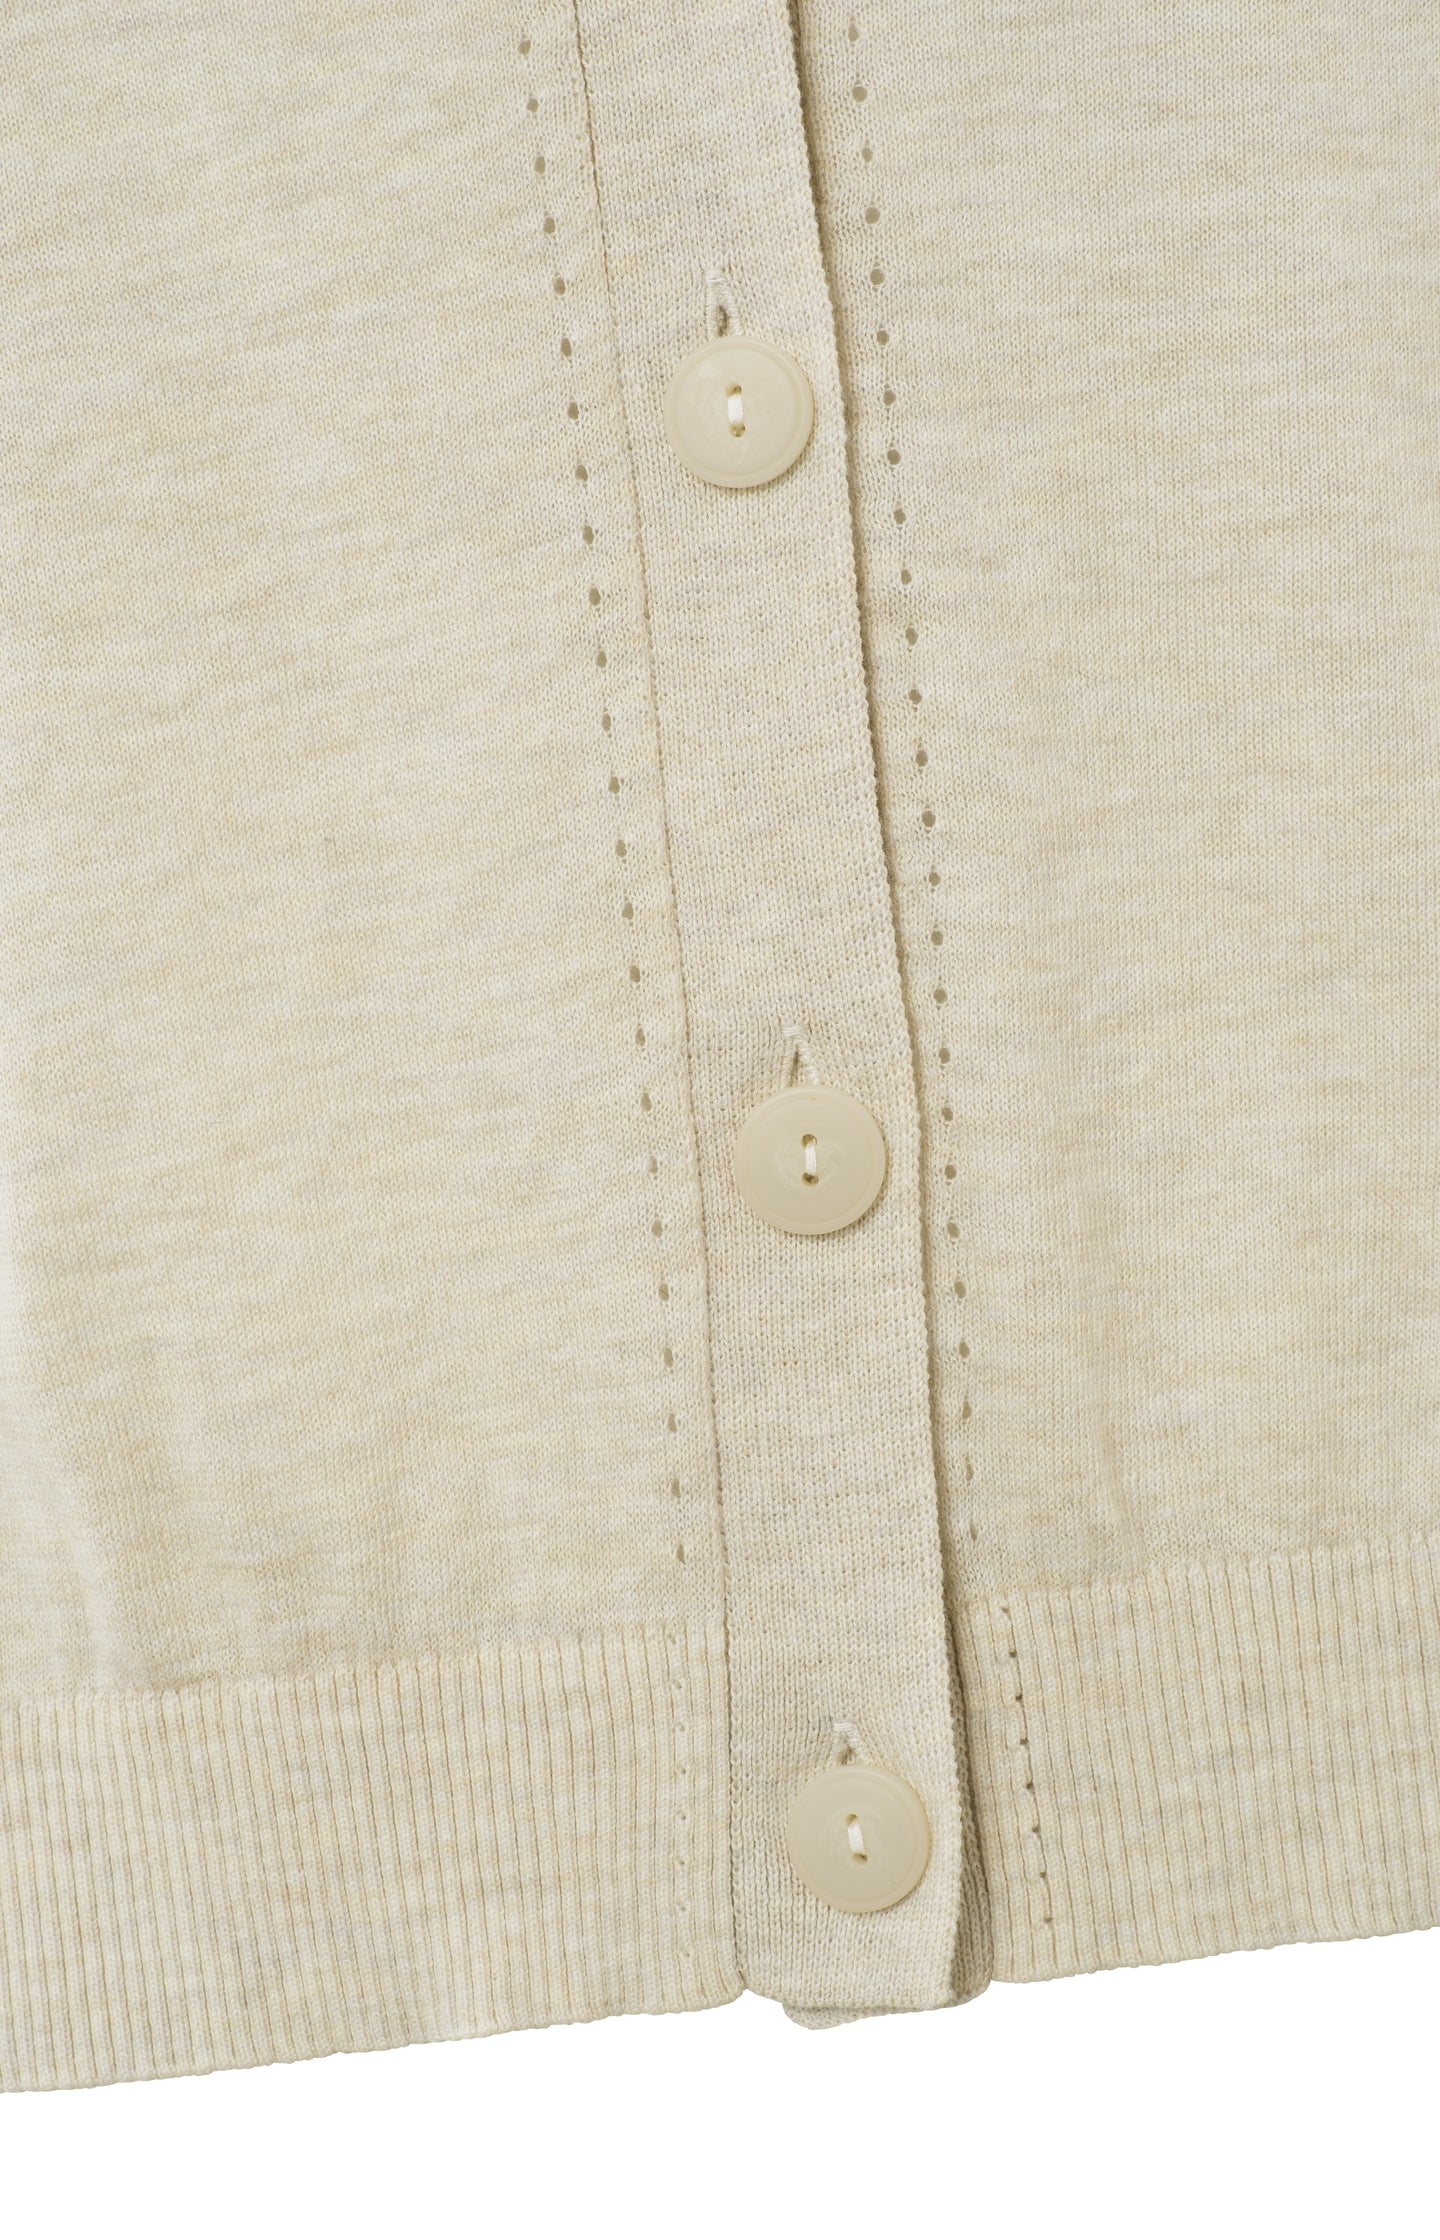 Sleeveless cardigan with V-neck, buttons and stitched detail